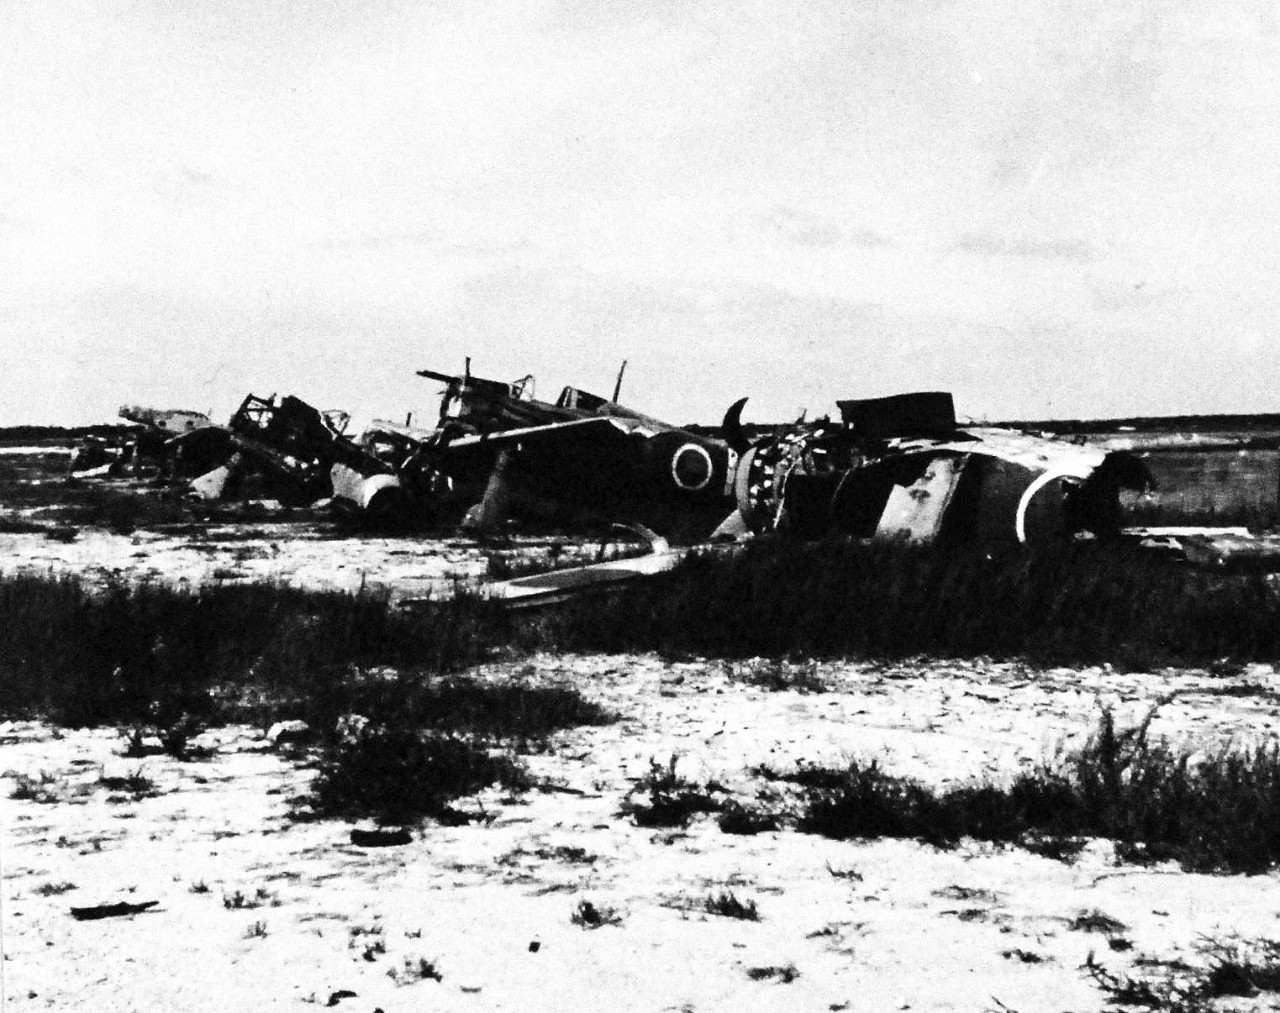 80-G-325331: Okinawa Campaign, April-June 1945.    Group of smashed Japanese aircraft in the revetments of the airstrip at Naha, Okinawa, Ryukyu Islands.  This specific aircraft is a Kawasaki K-61, nicknamed “Tony”.     Photograph received 6 July 1945.  Official U.S. Navy Photograph, now in the collections of the National Archives.   (2014/5/1). 